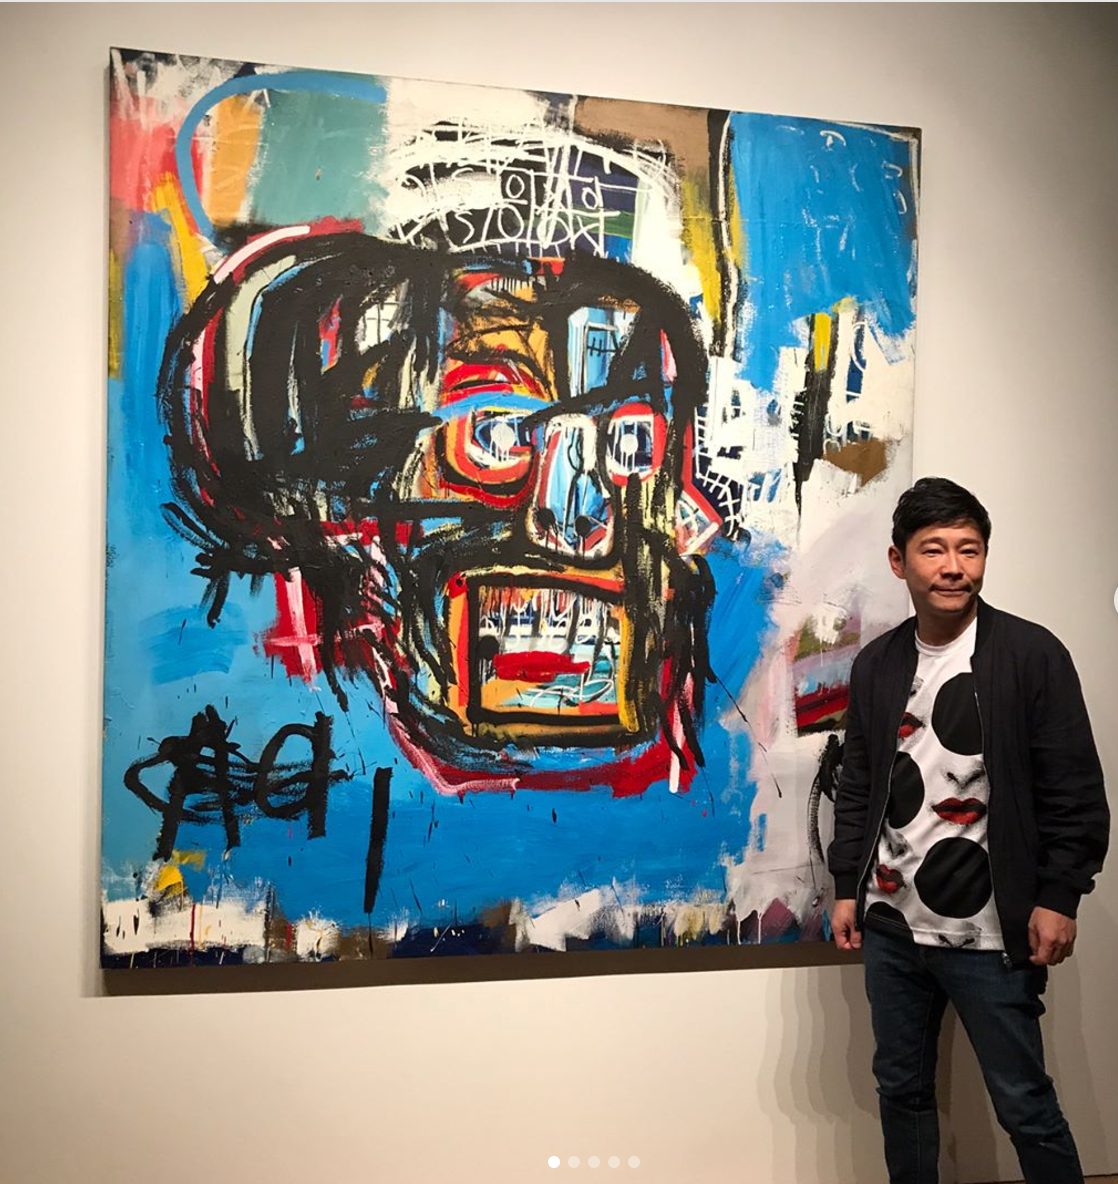 This Jean-Michel Basquiat Painting Just Sold For $110.5 Million